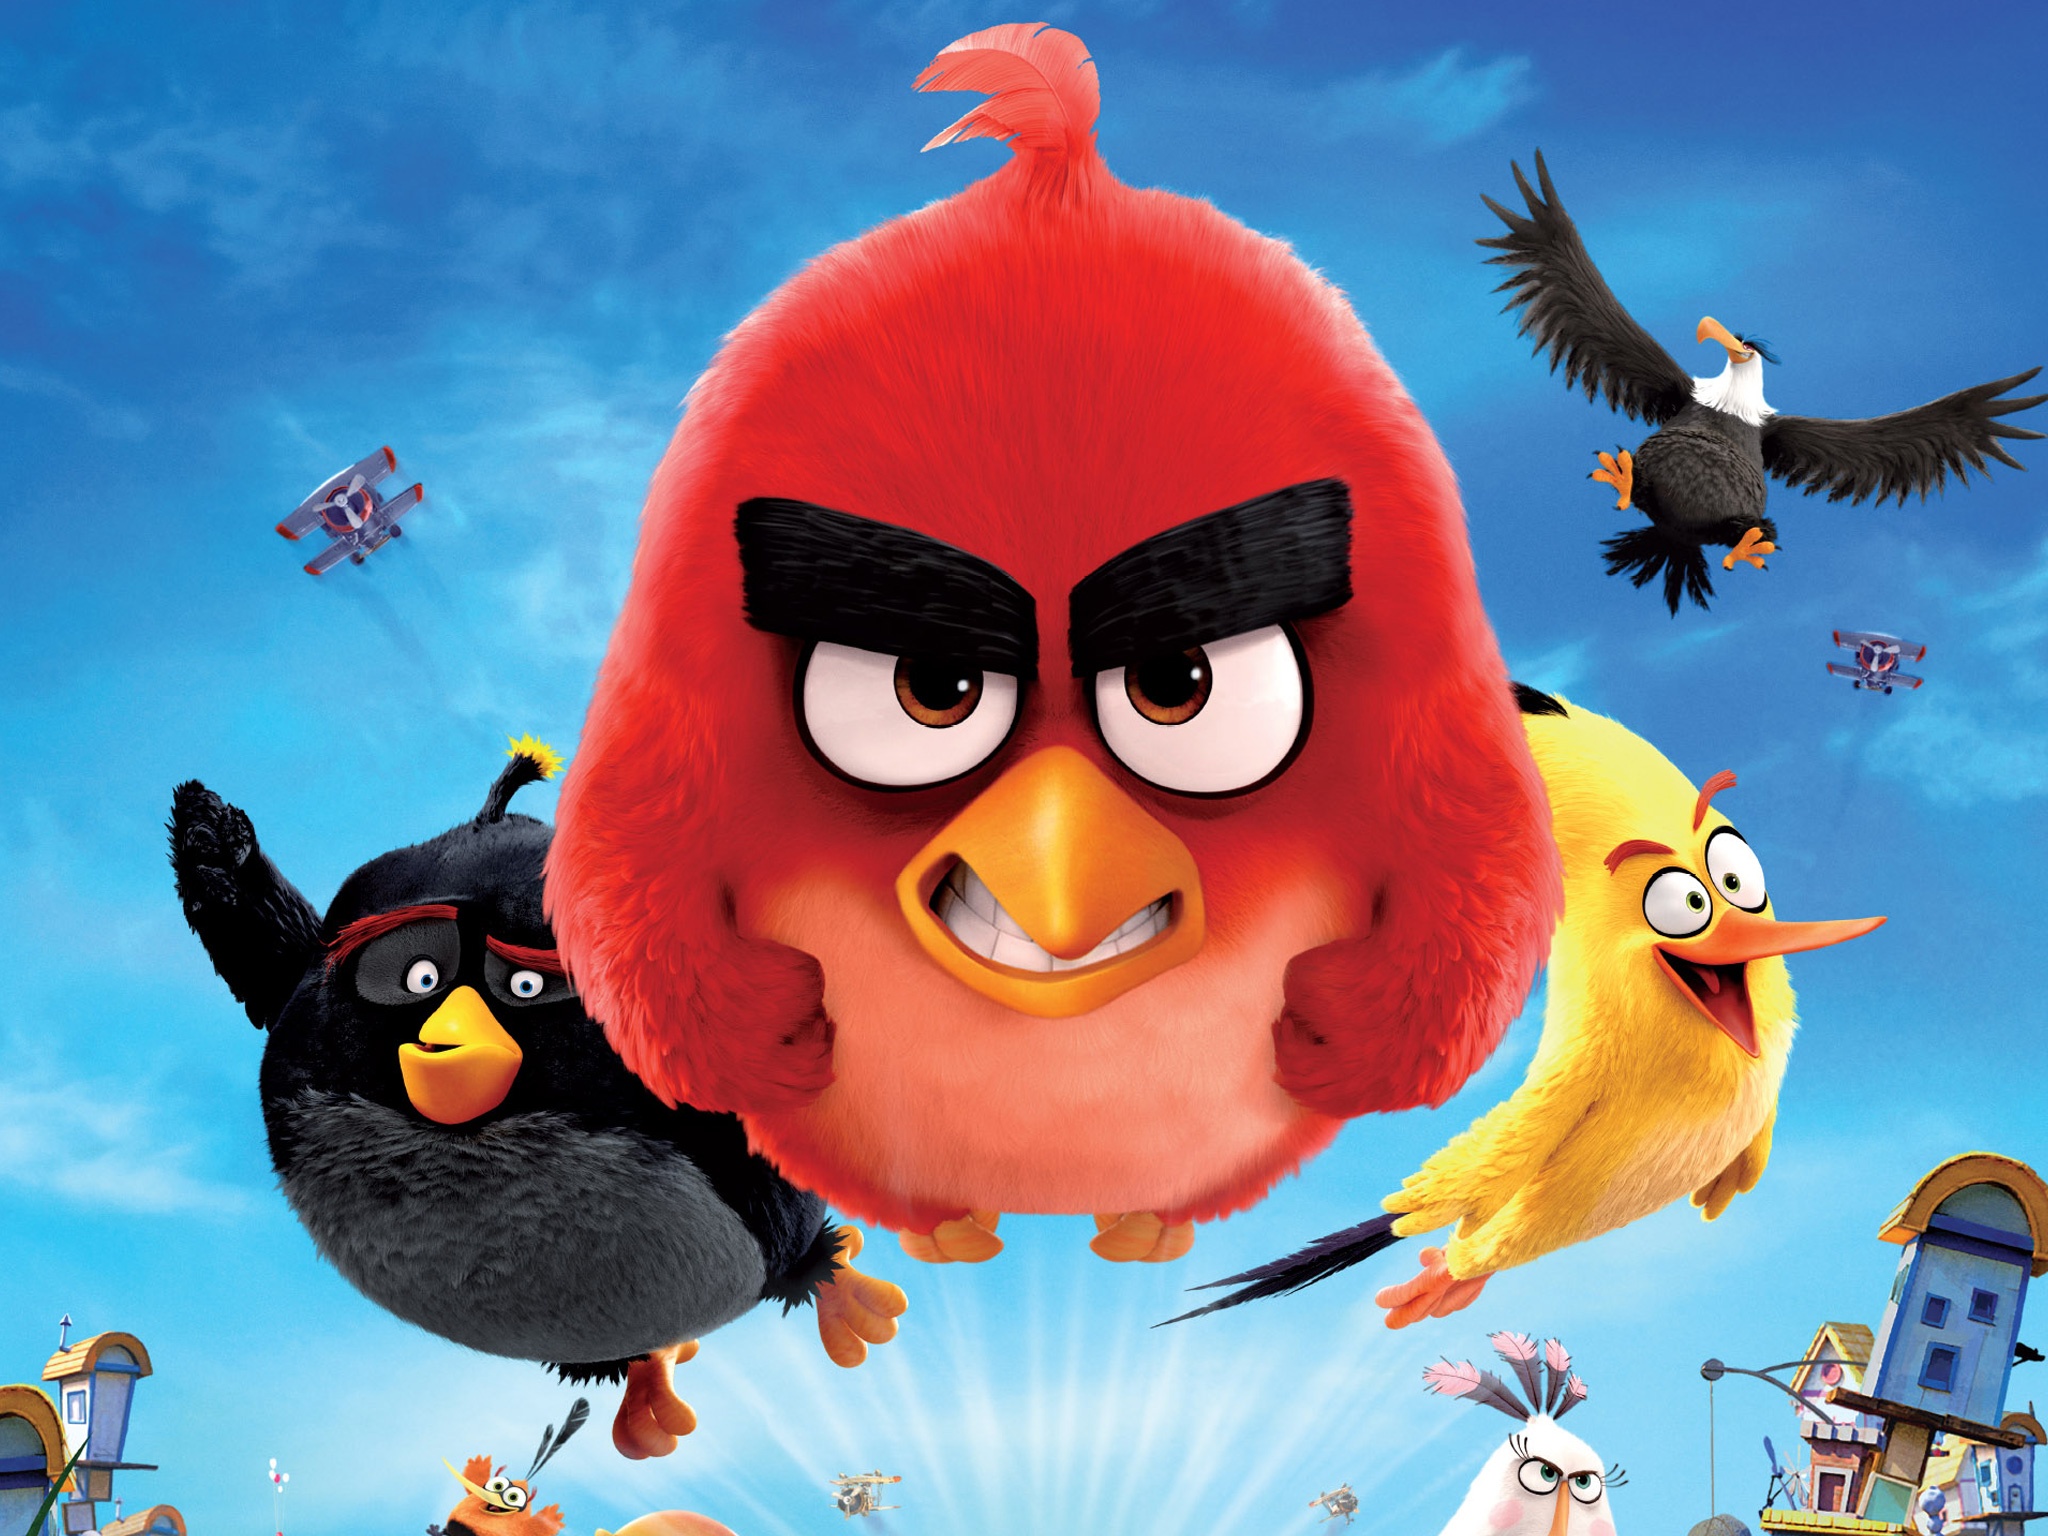 free-download-angry-birds-movie-wallpapers-in-jpg-format-for-free